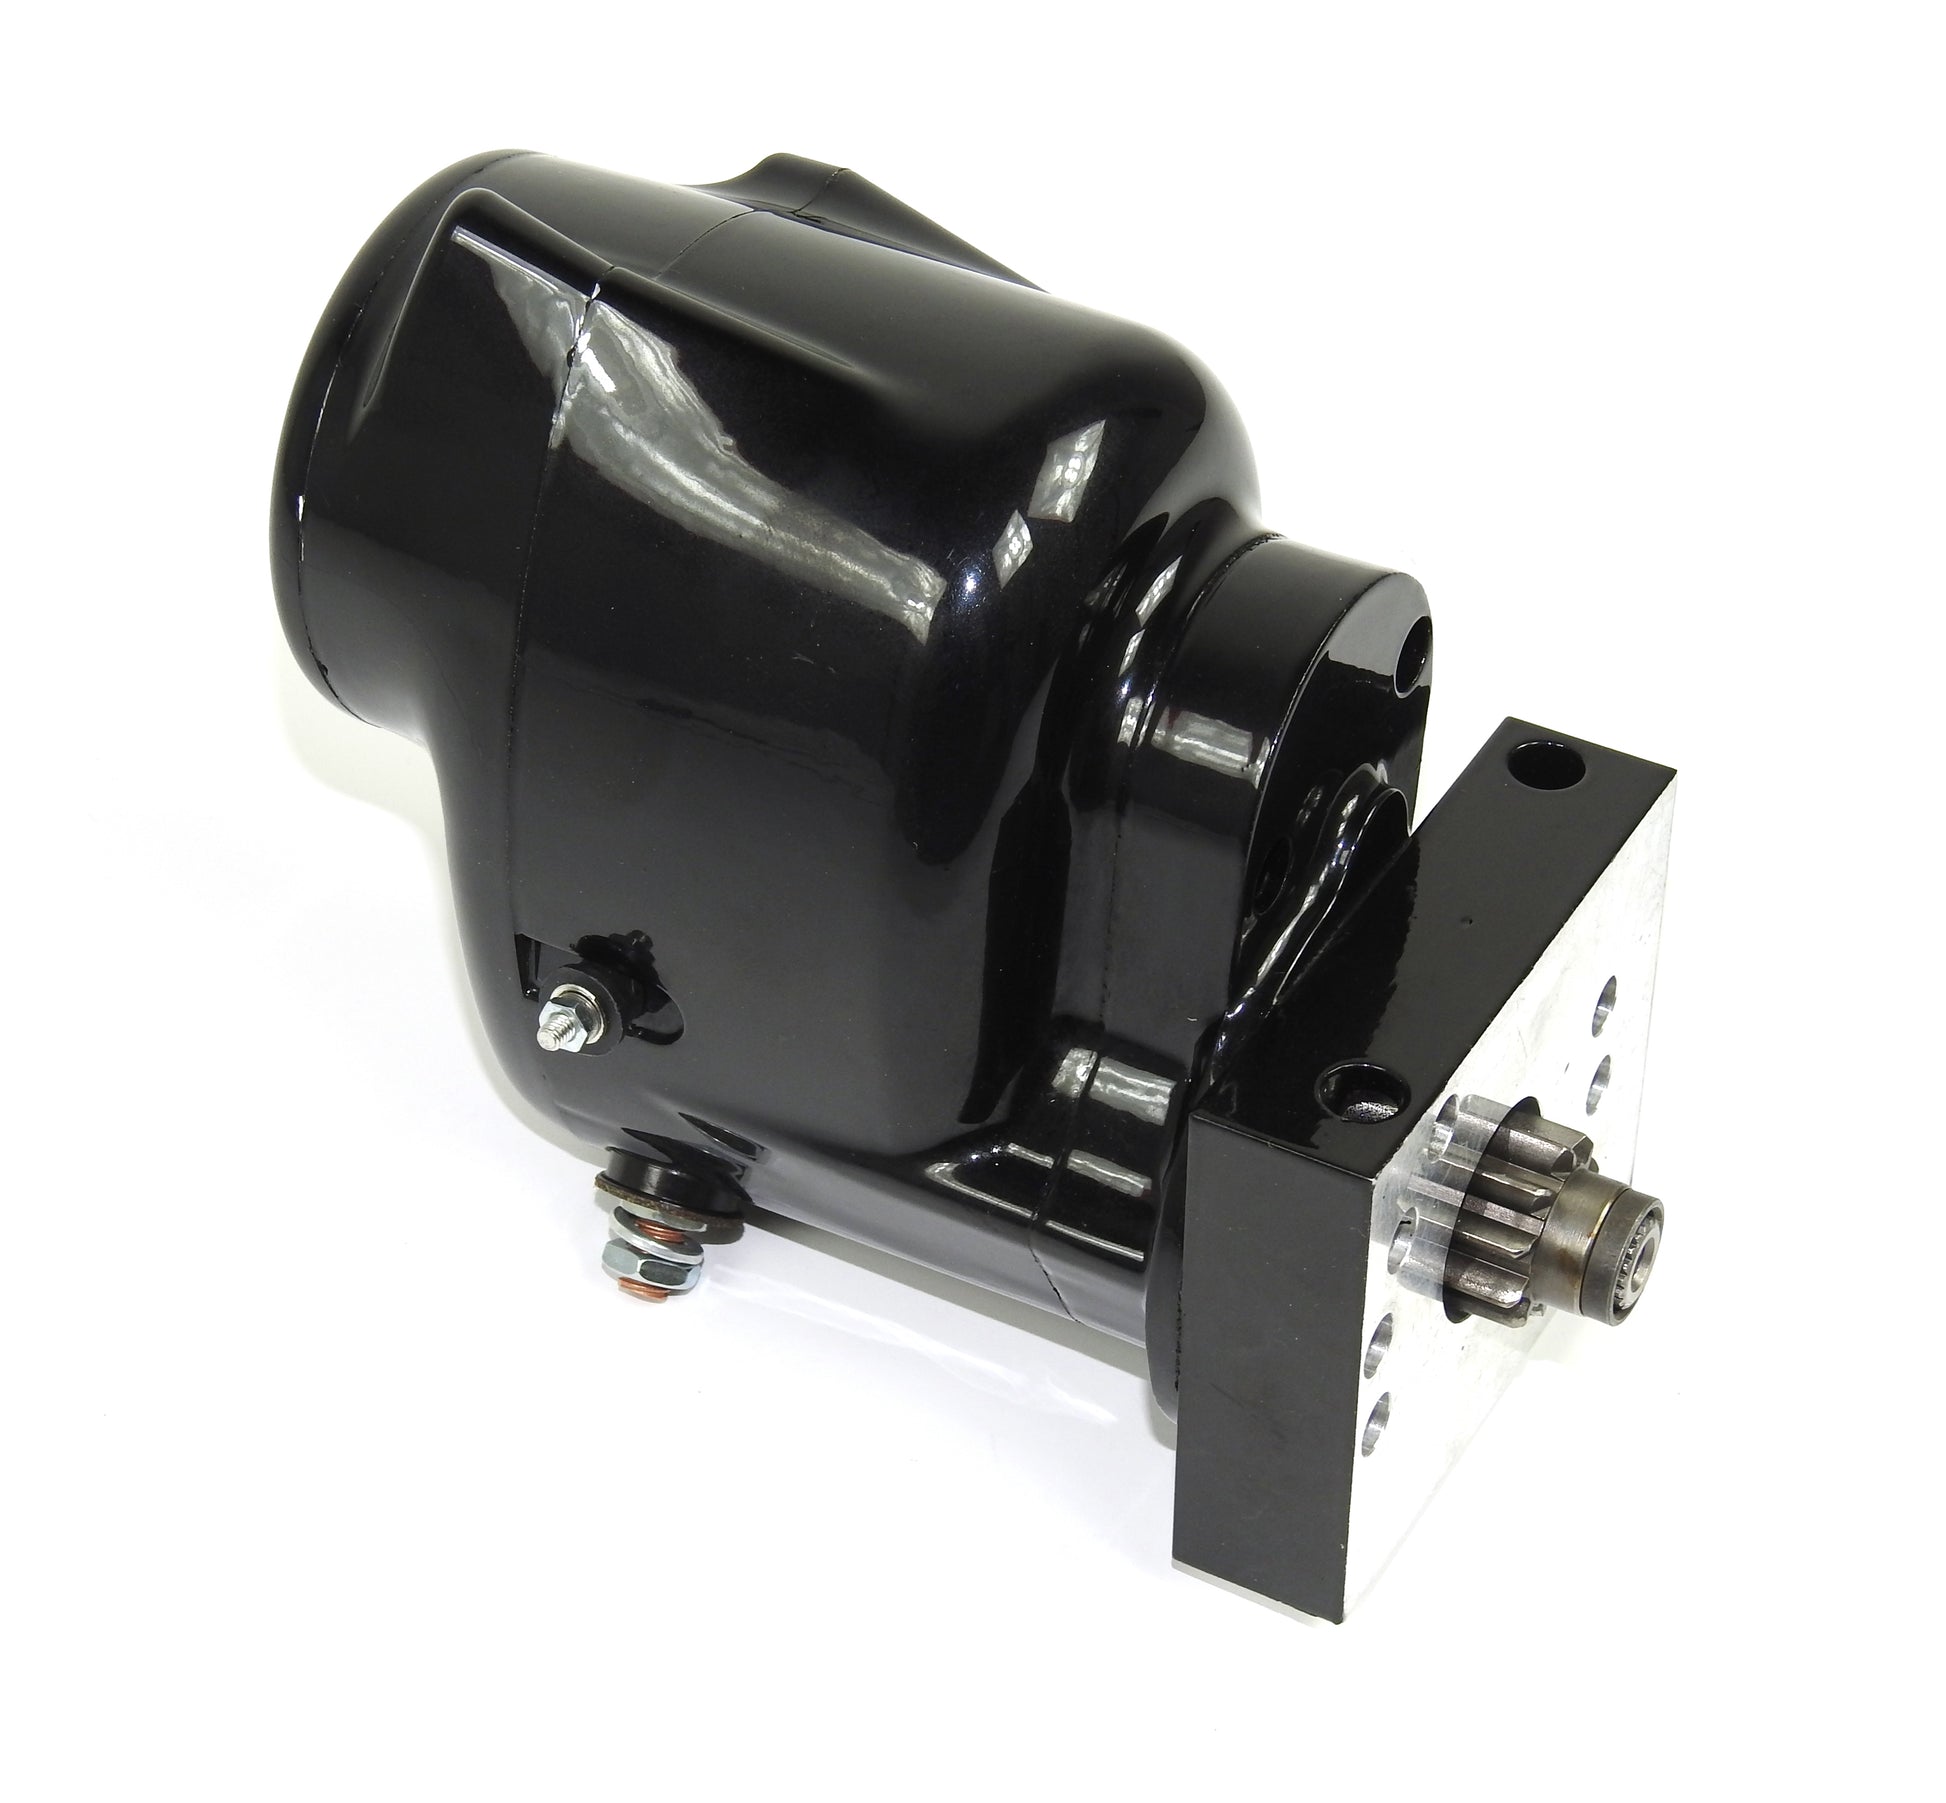 Pertronix part number S3002B-M Contour marine Starter GM LS engines with black finish